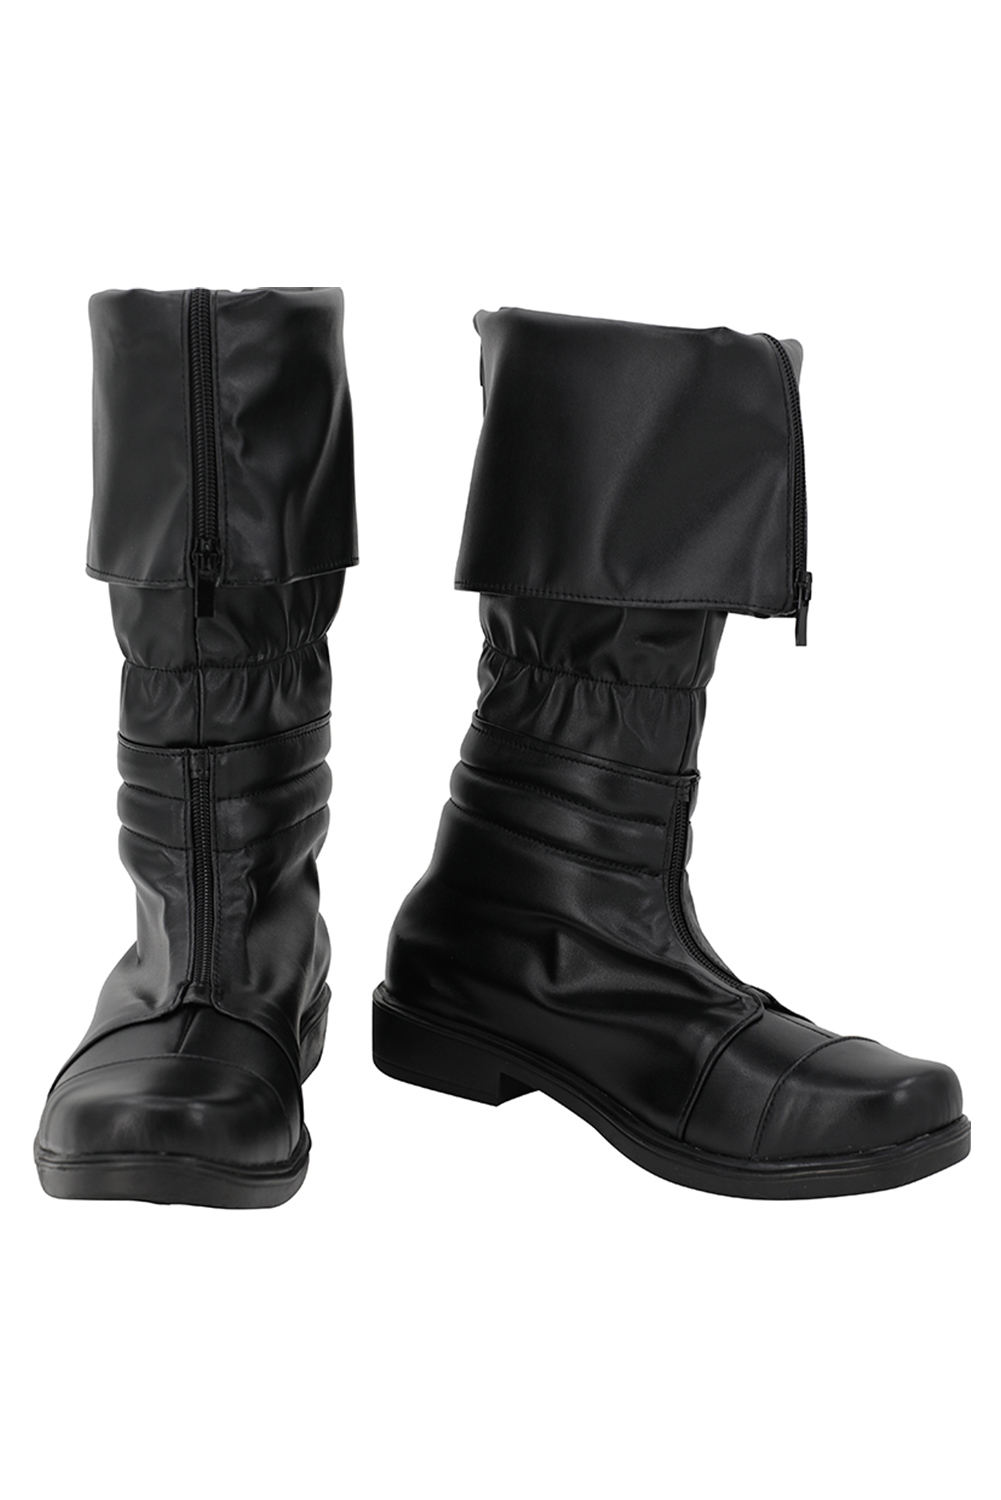 Game Crisis Core - Final Fantasy VII Cloud Strife Cosplay Shoes Boots Halloween Custom Made Costumes Accessory